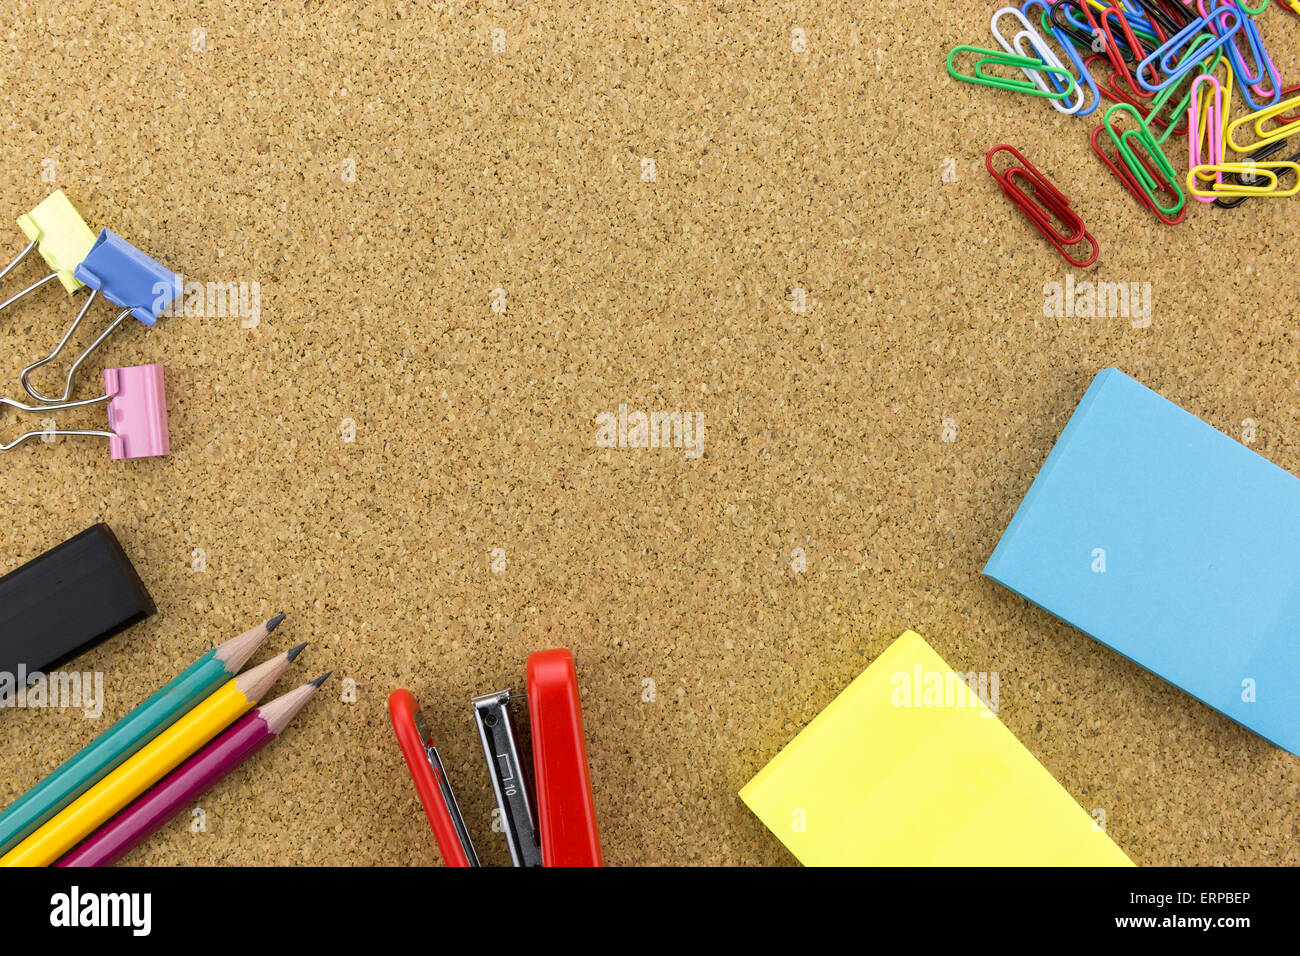 wallpaper stationary on cork board with many office supplies tools Stock Photo